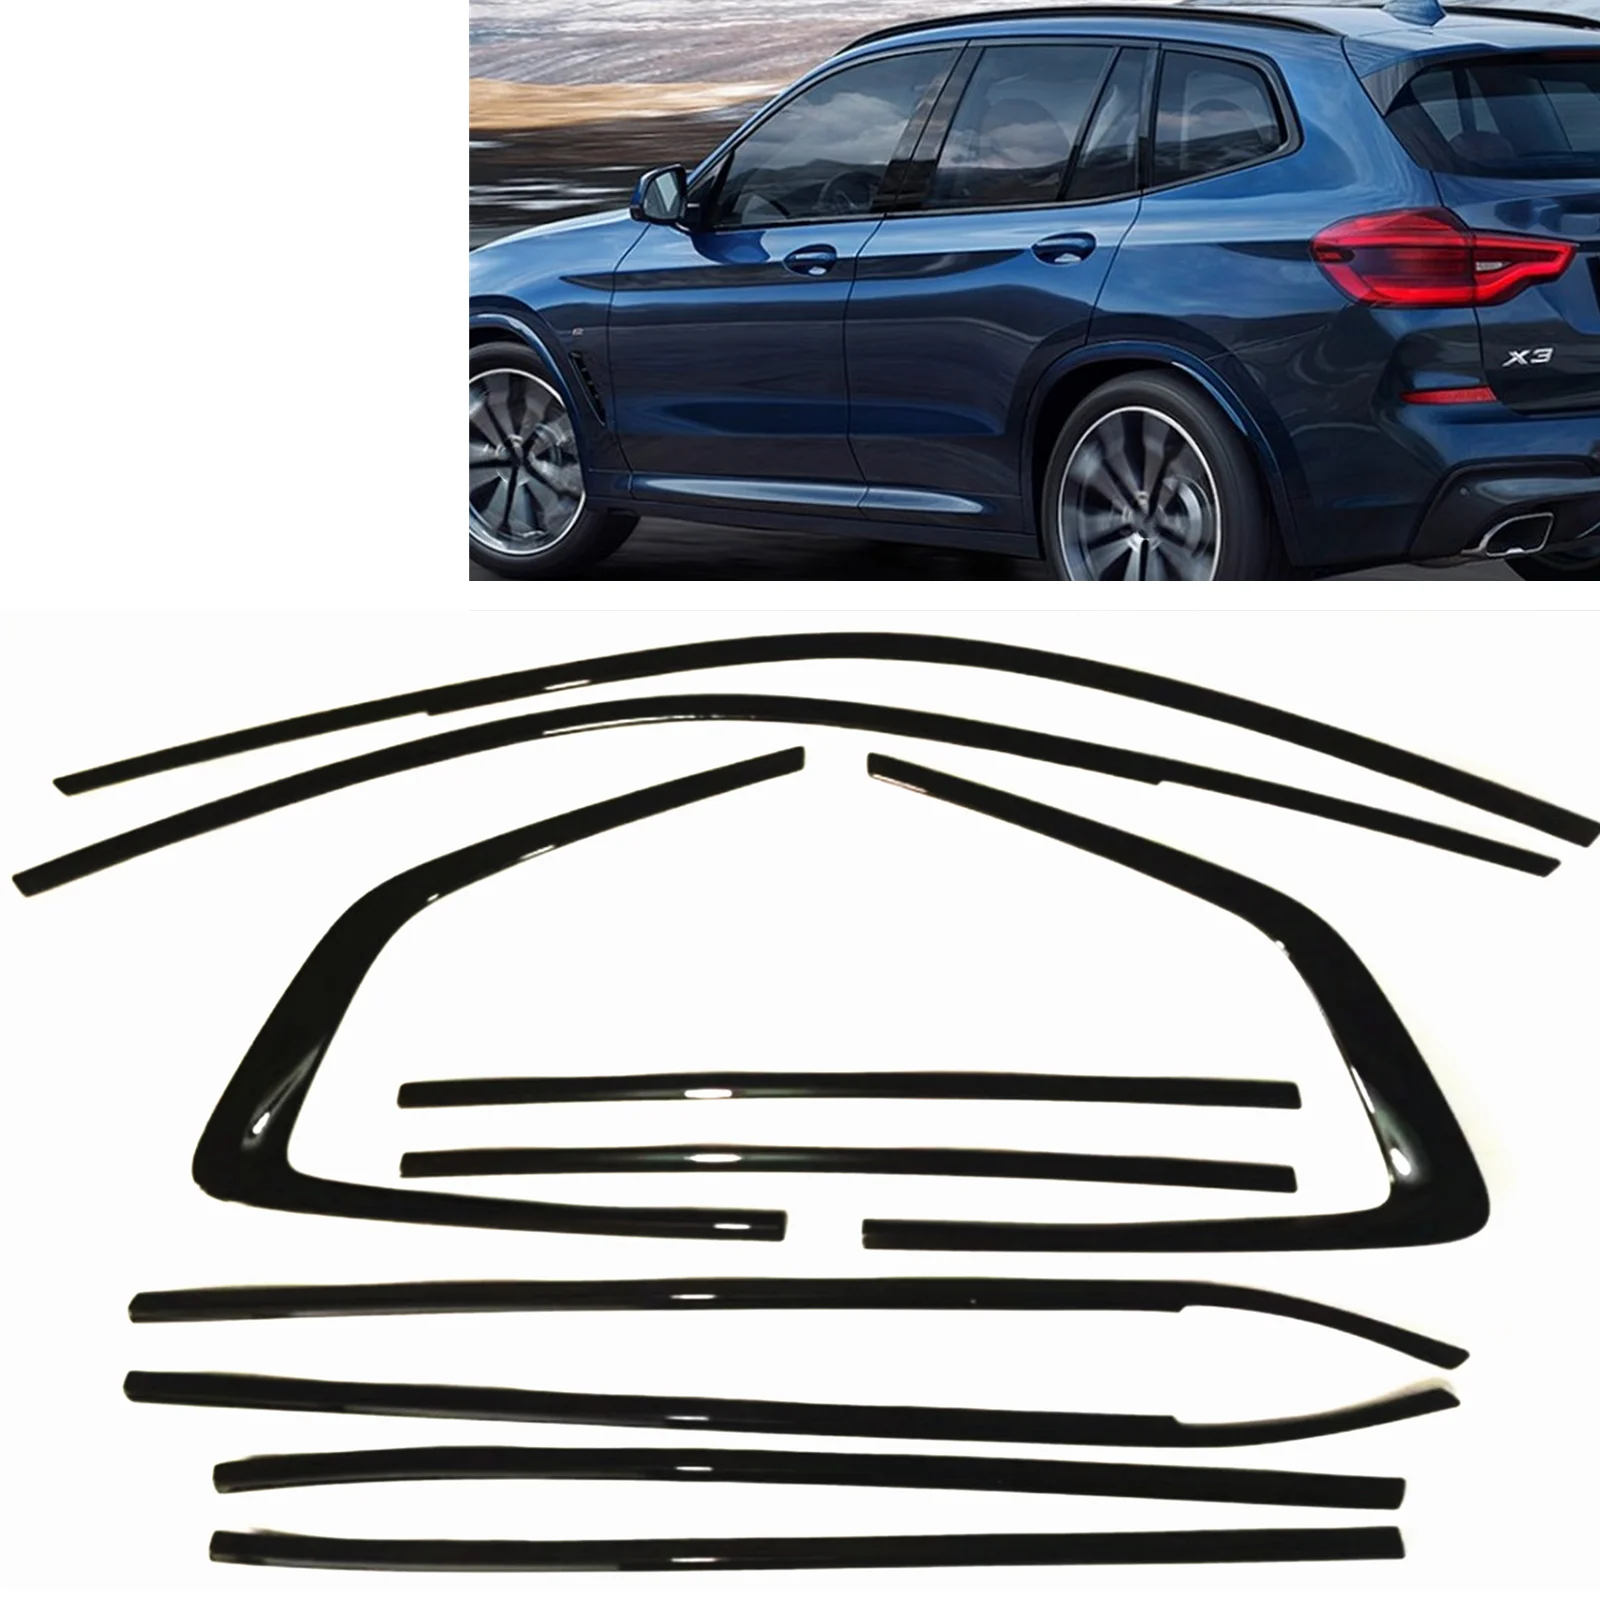 

Car Strip Cover Weatherstrip Trim Sticker Exterior Seal Gasket Stainless Steel For BMW G01 X3 2018 2019 2020 2021 2022 2023